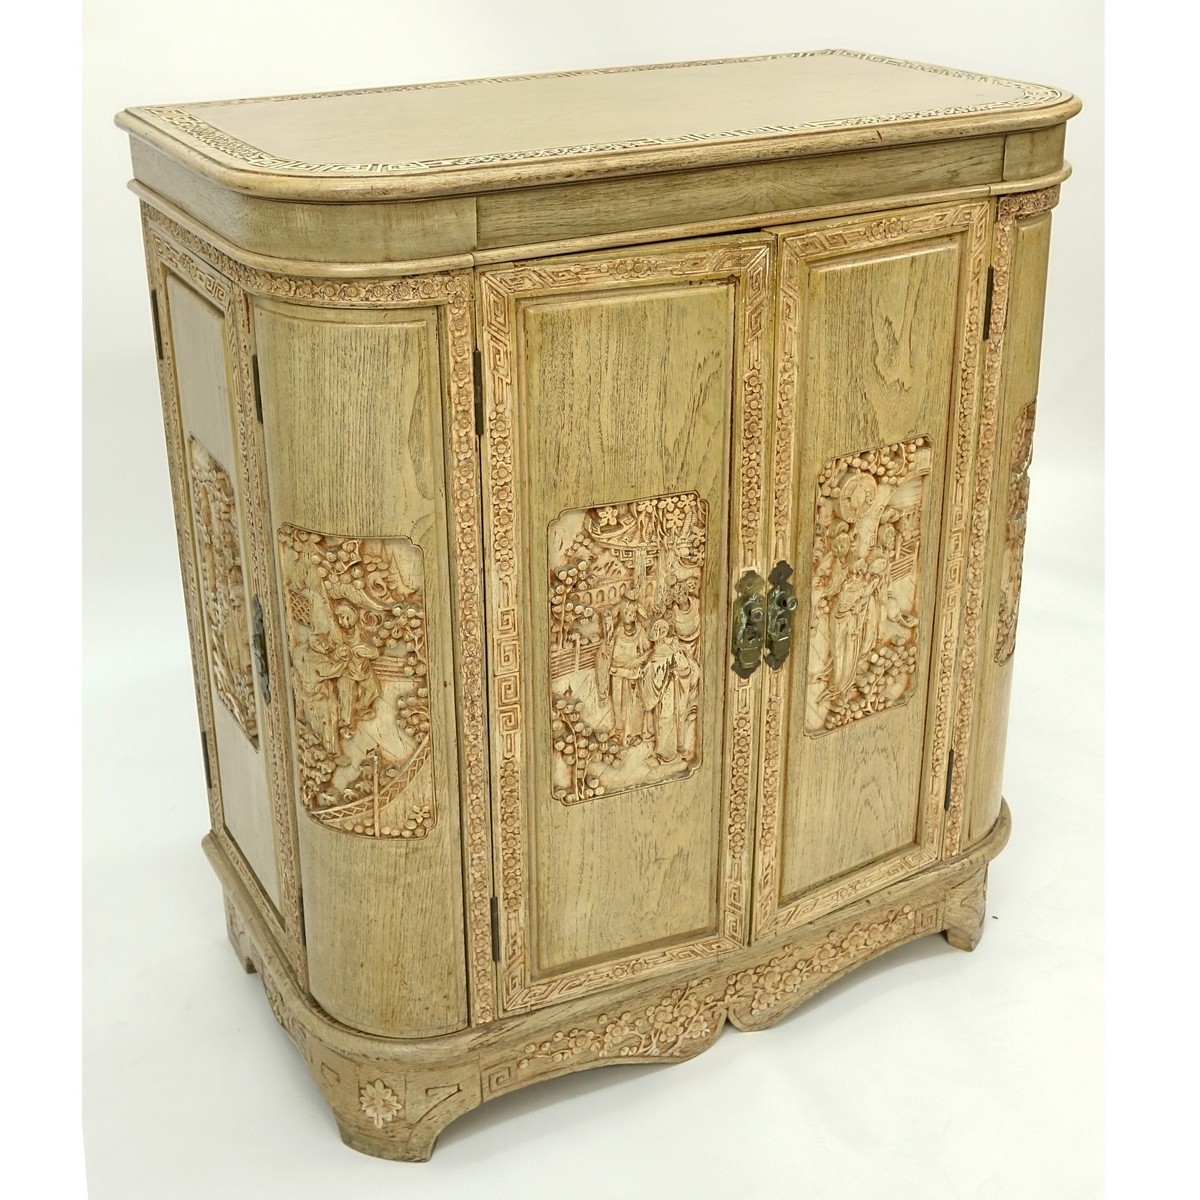 Vintage Chinese Motif Carved Wood Liquor Cabinet. Top lifts to reveal busy carved scene and fold out panels for serving.